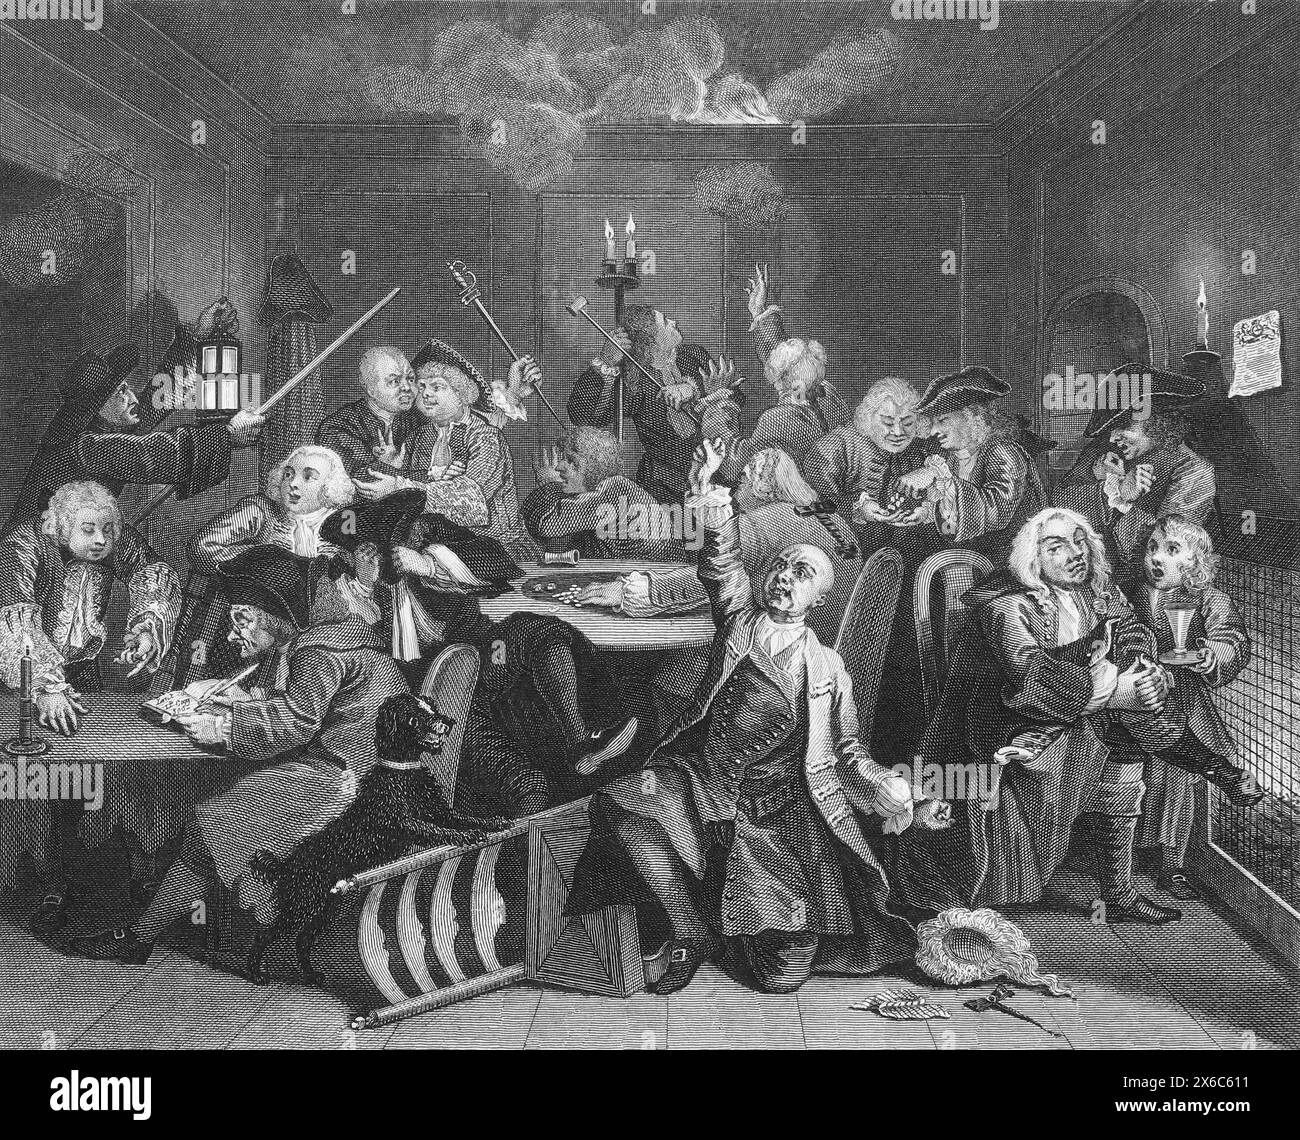 Black and White Illustration: Gaming House Scene. Engraving after William Hogarth (1697 - 1764)  from his series, 'The Rake's Progress' Stock Photo